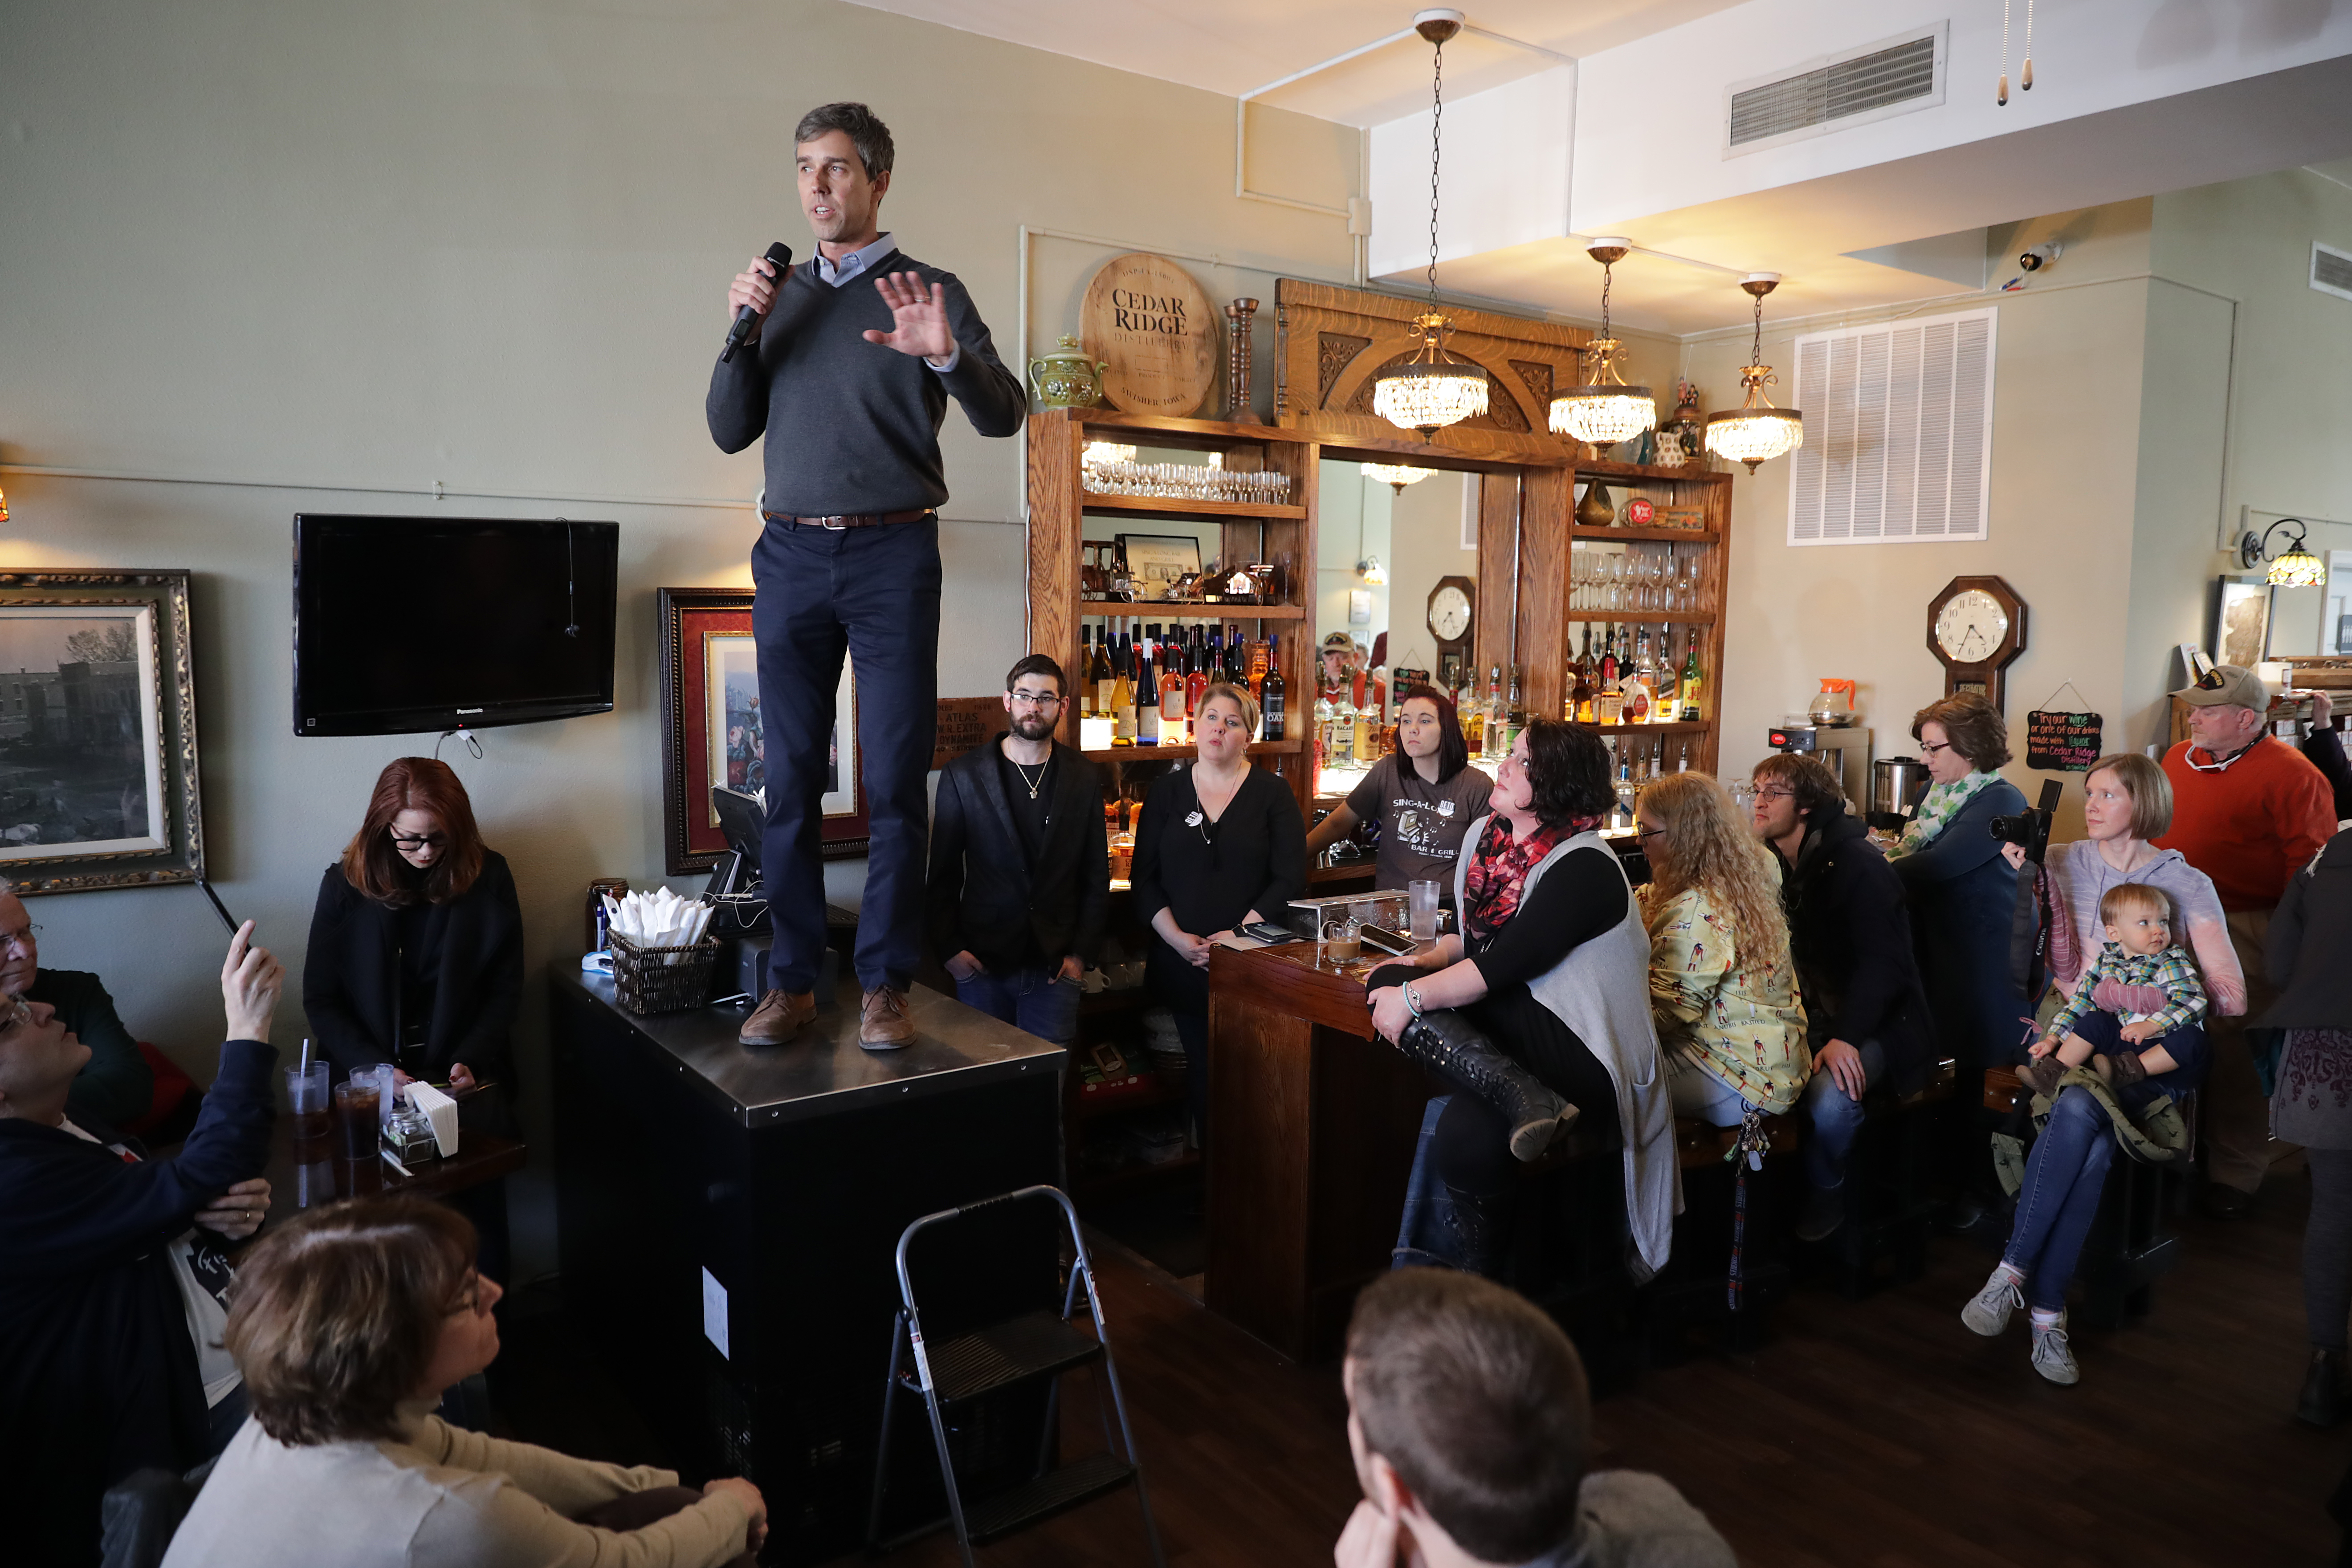 MOUNT VERNON, IOWA - MARCH 15: Democratic presidential candidate Beto O'Rourke answers questions from voters during his second day of campaigning for the 2020 nomination at The Sing-A-Long Bar and Grill March 15, 2019 in Mount Vernon, Iowa. After losing a long-shot race for U.S. Senate to Ted Cruz (R-TX), the 46-year-old O'Rourke is making his first campaign swing through Iowa after jumping into a crowded Democratic field this week. (Photo by Chip Somodevilla/Getty Images)